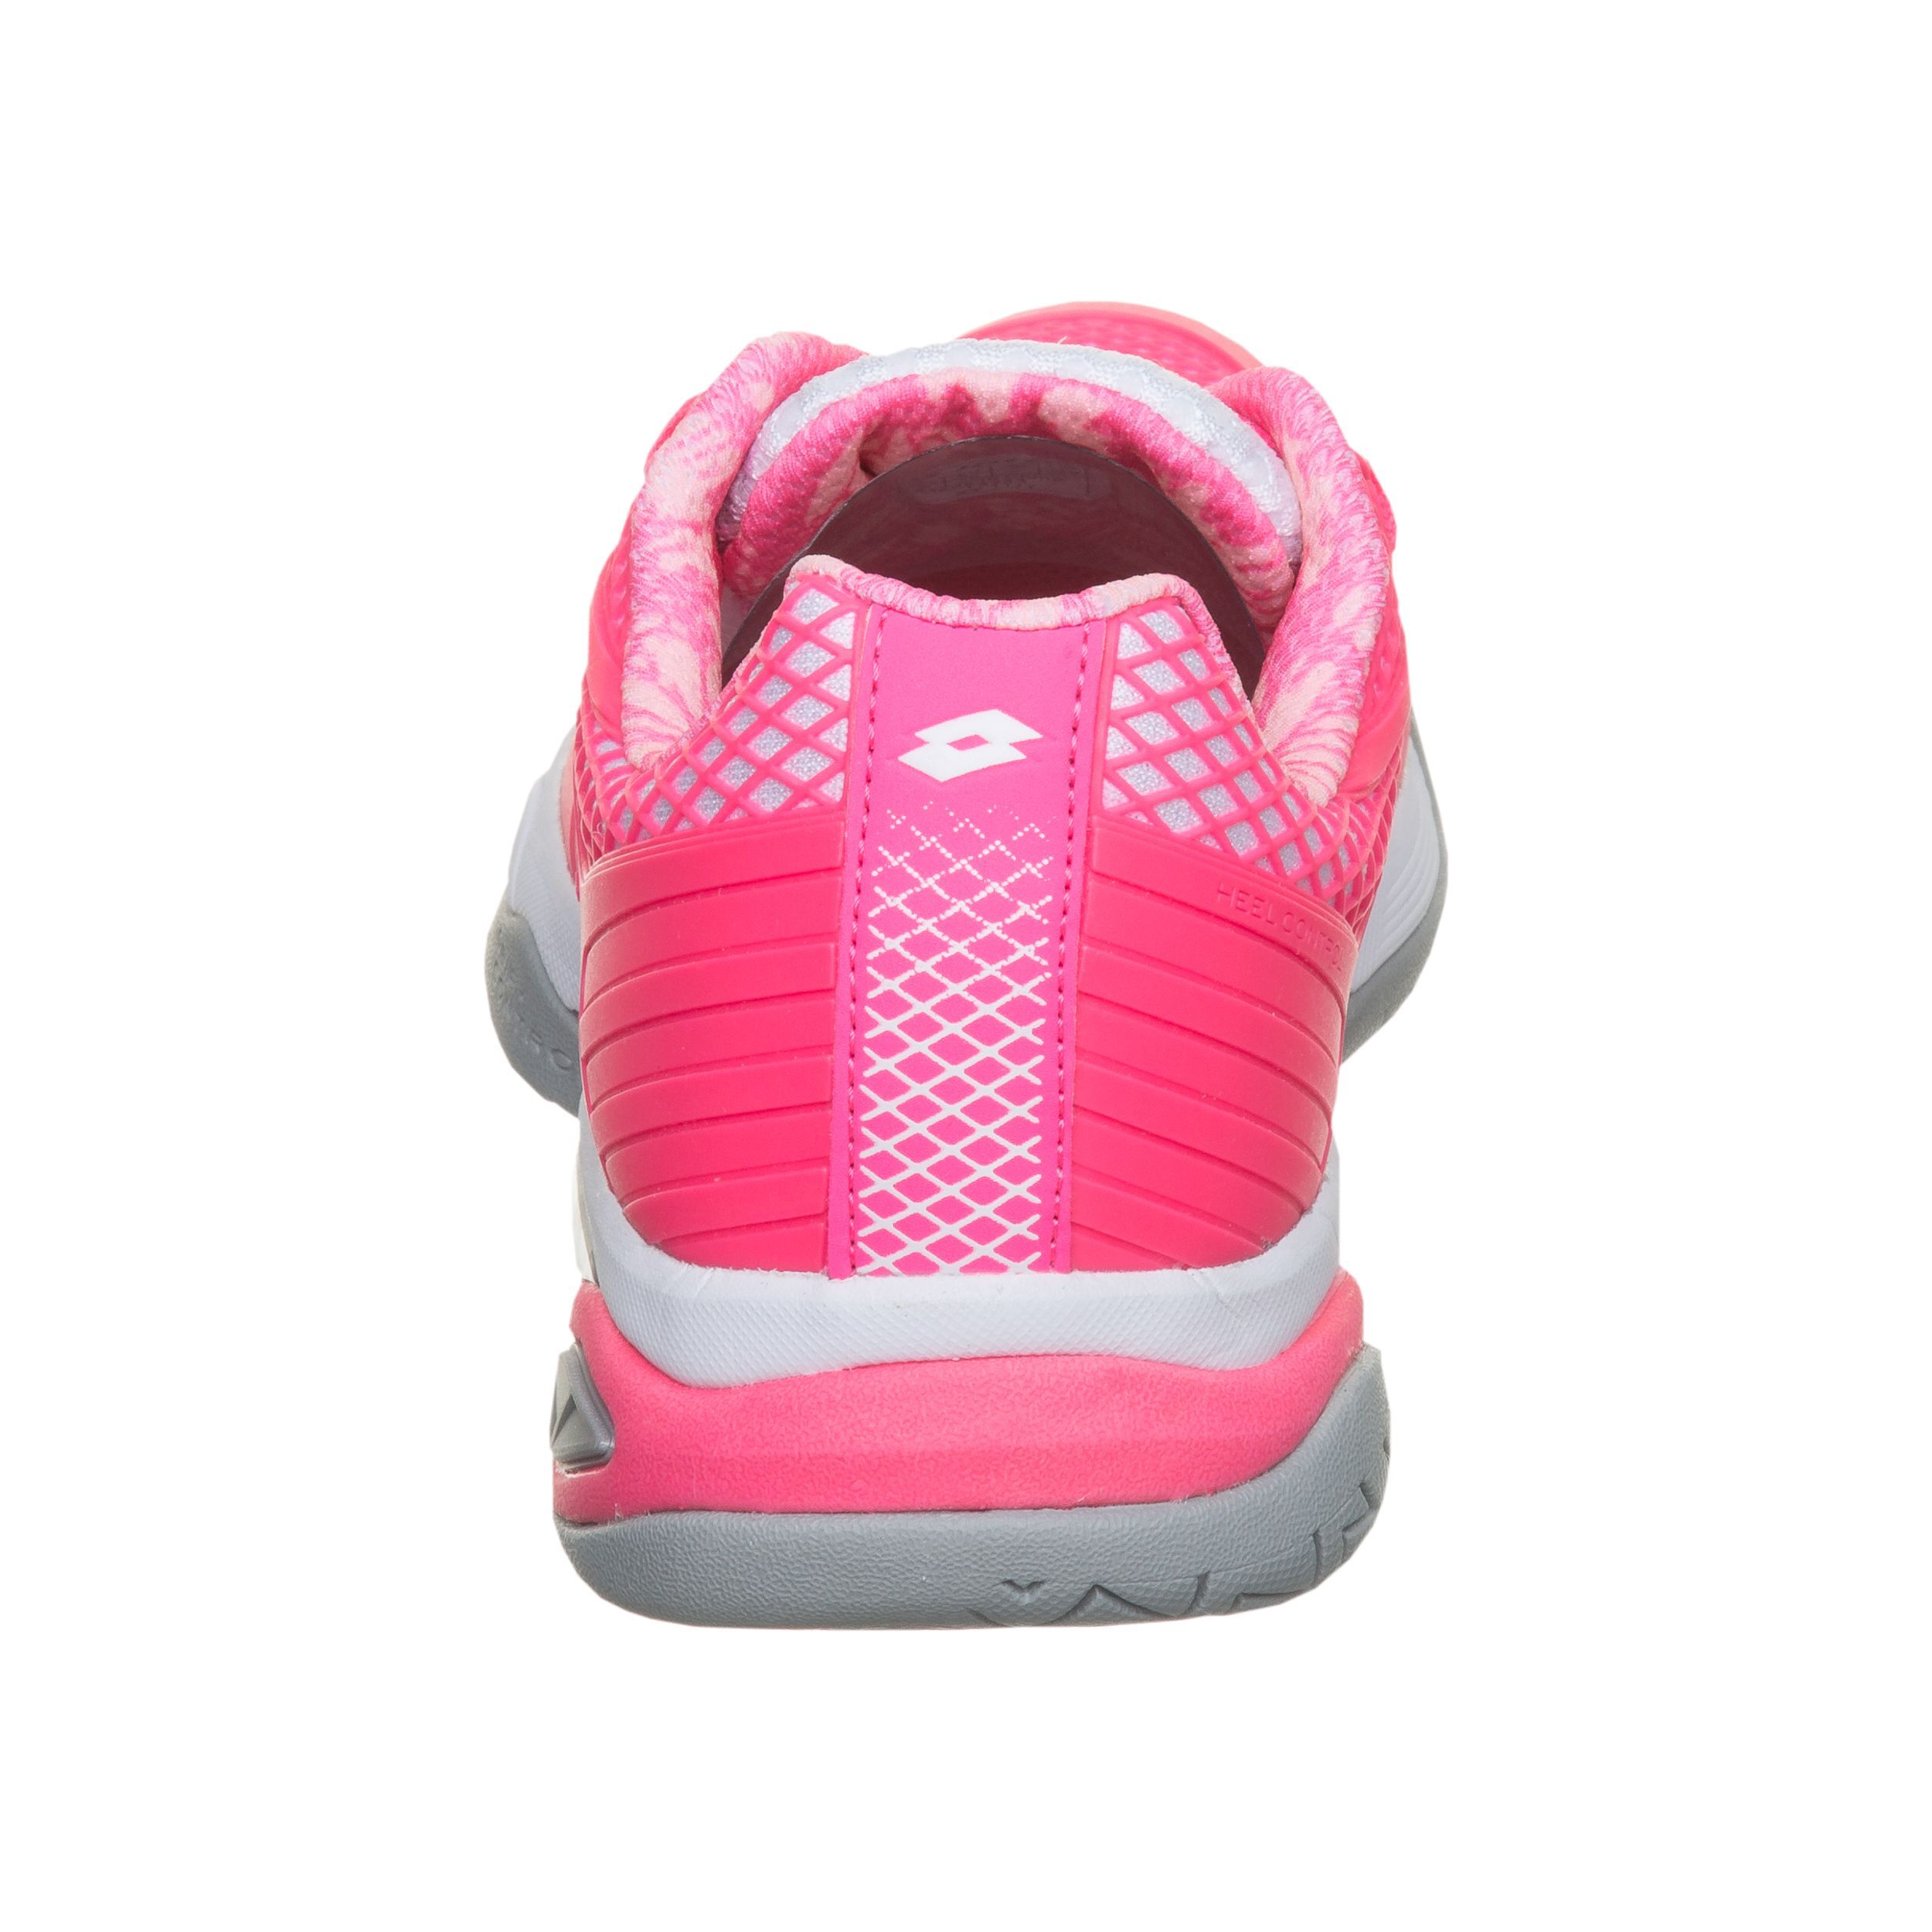 Black/Pink Details about   Lotto Viper Ultra IV Speed Women's Tennis Shoe Authorized Dealer 